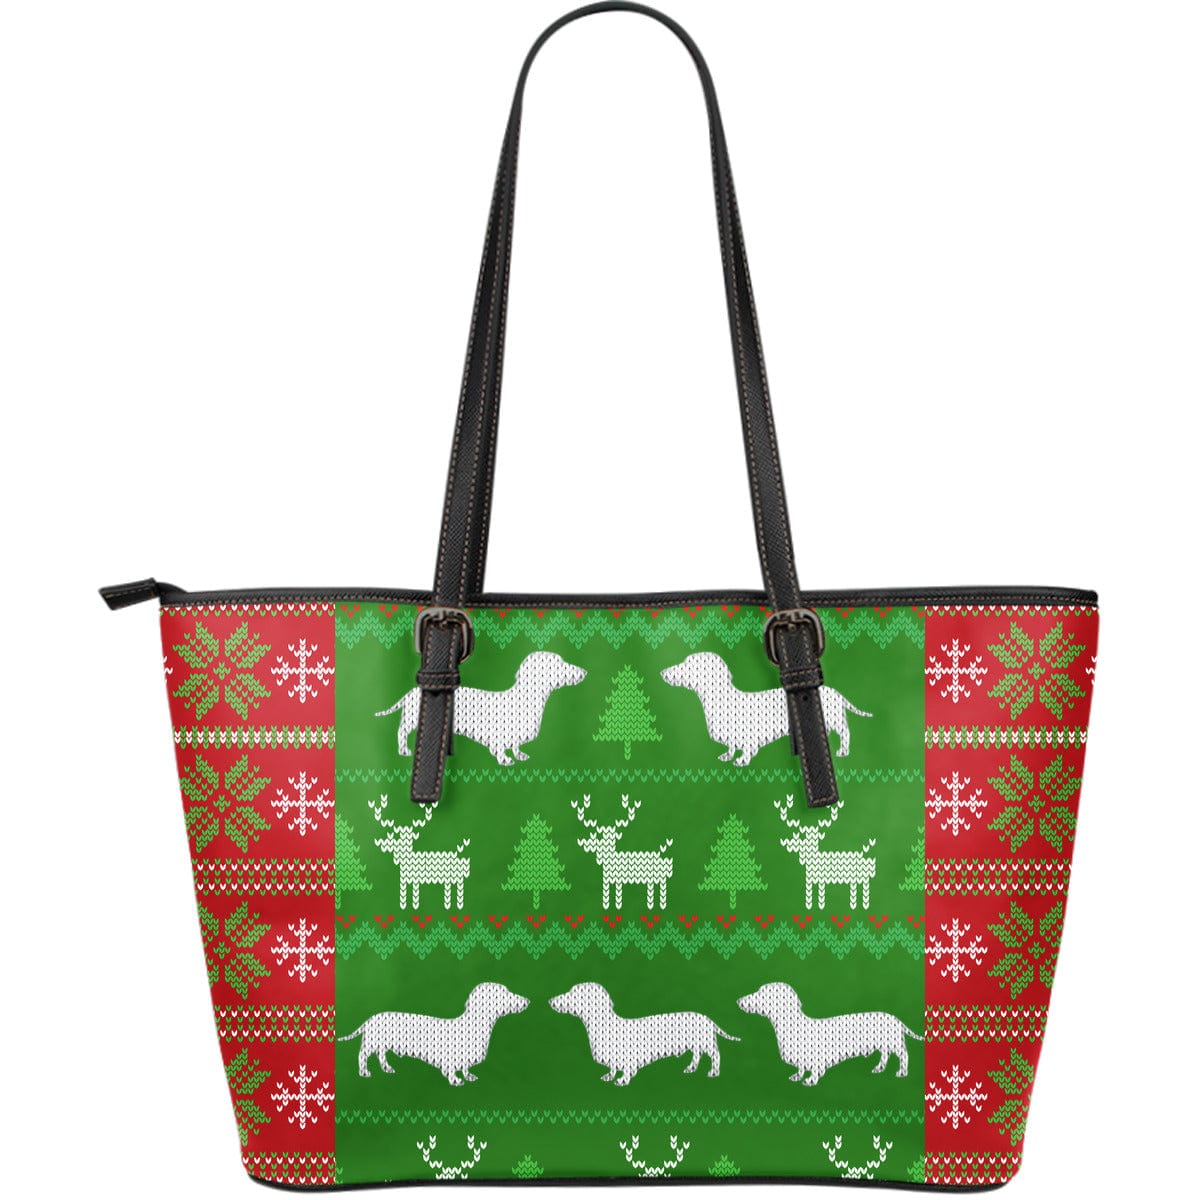 Ugly Christmas Sweater Large Leather Tote Bag With Dachshunds